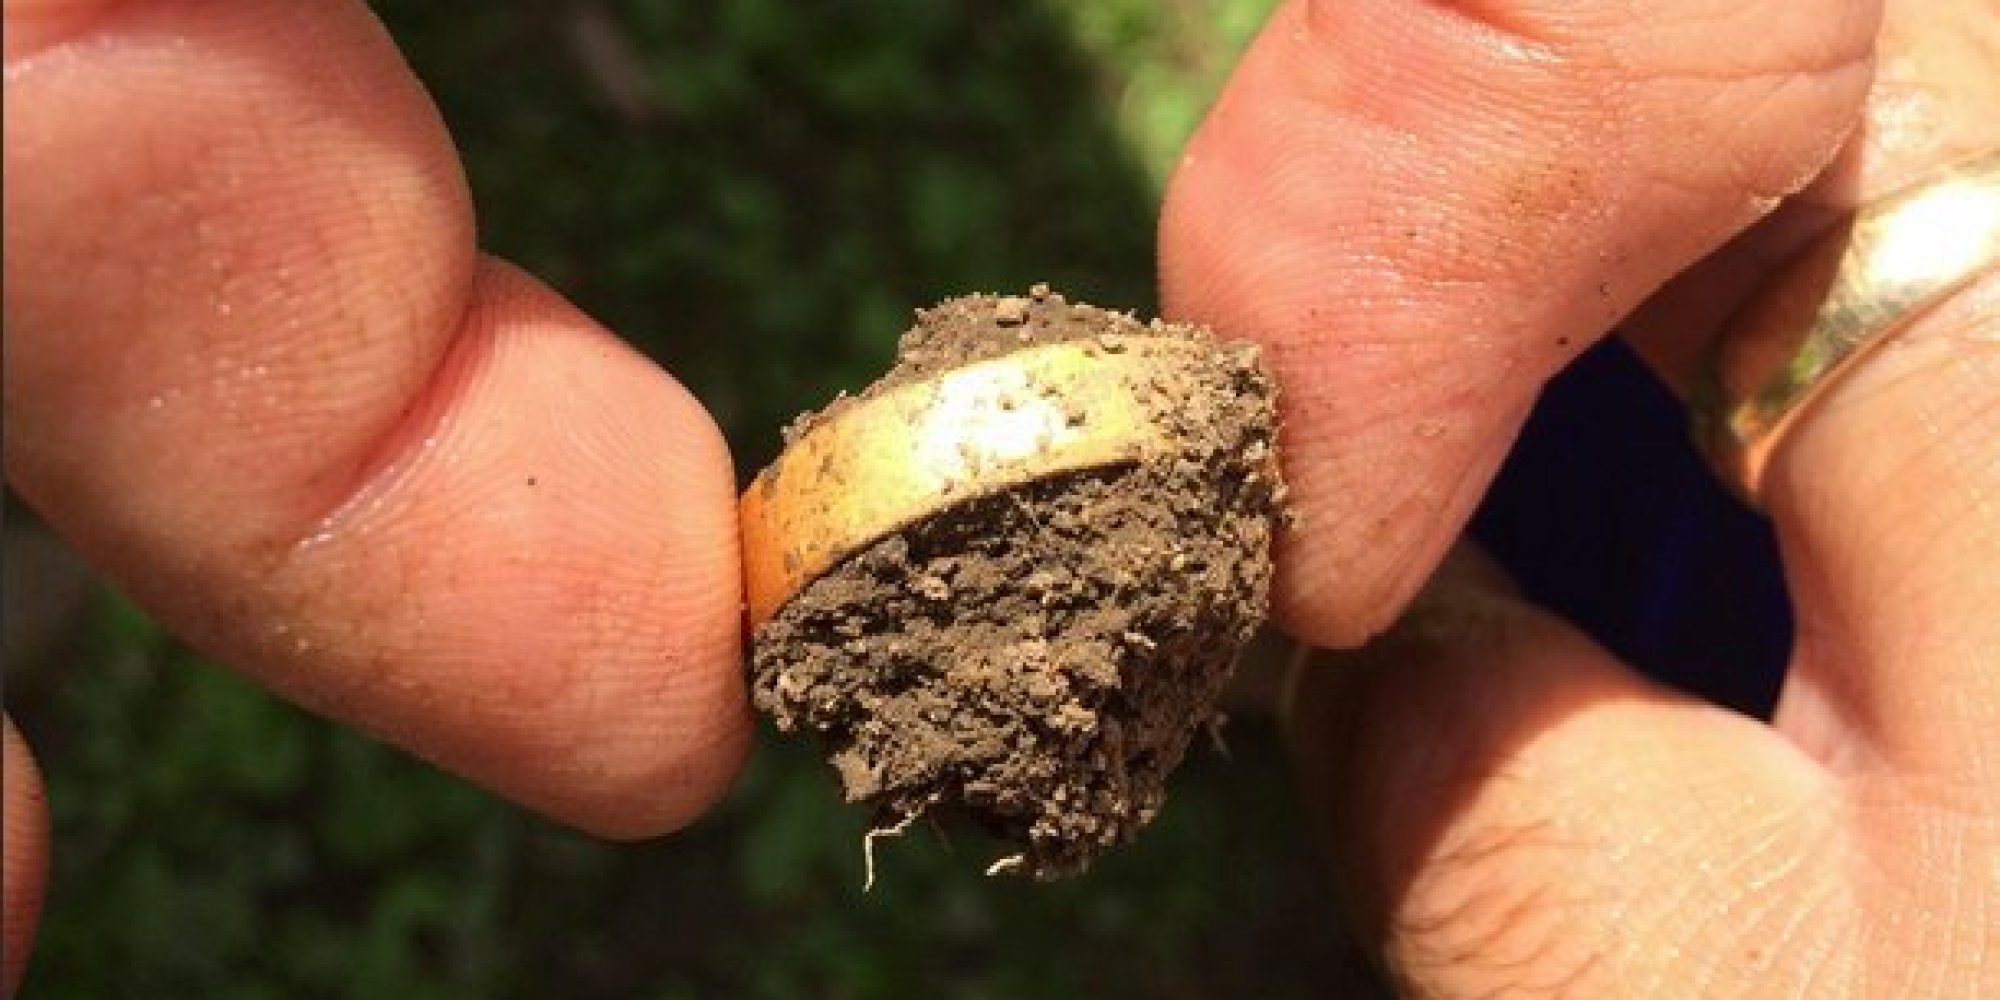 Man Finds Lost Wedding Ring After 15 Years While